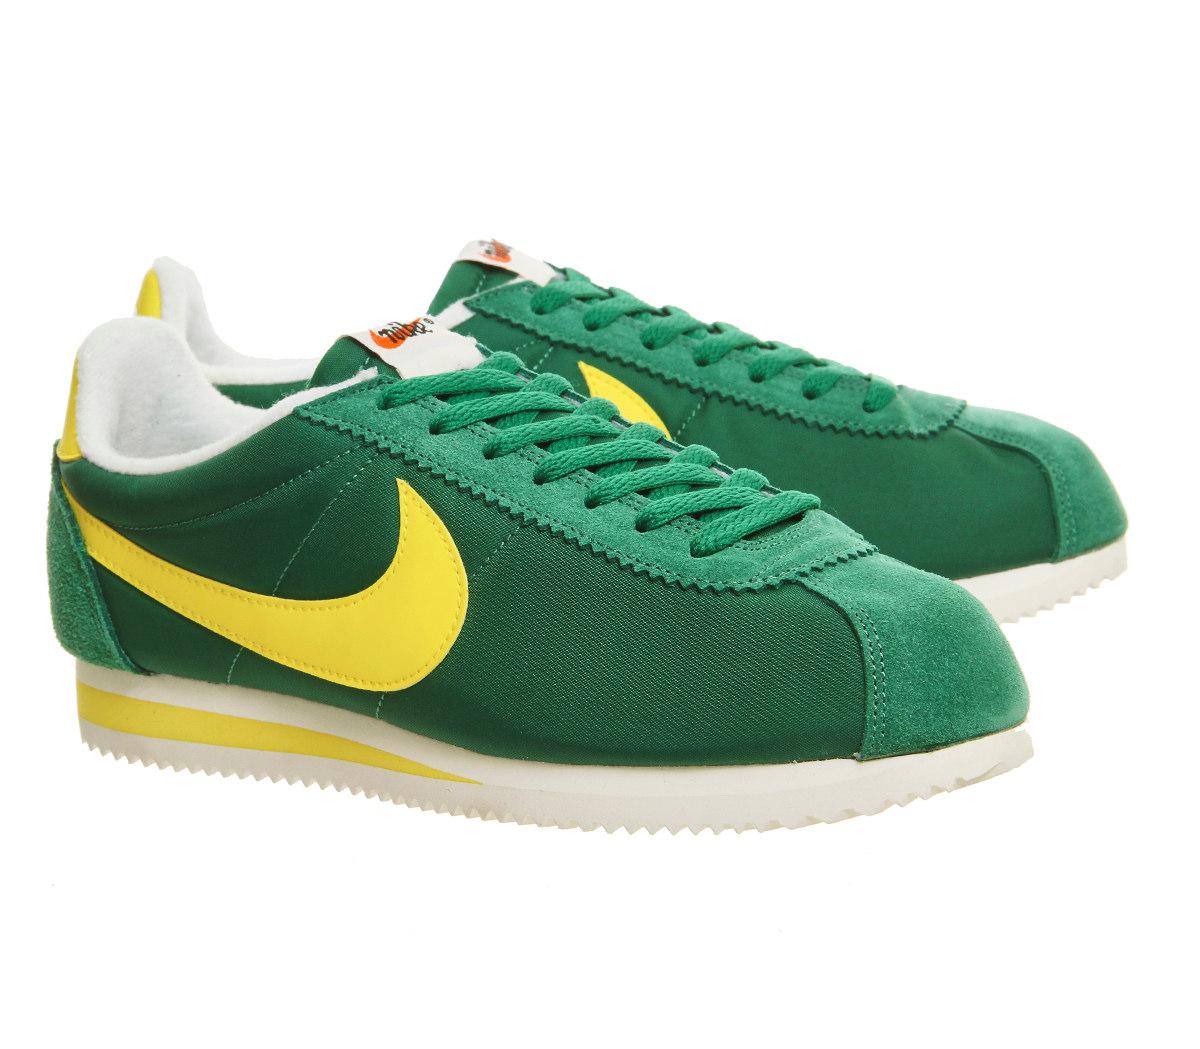 Nike Synthetic Cortez Nylon Trainers in Green for Men - Lyst